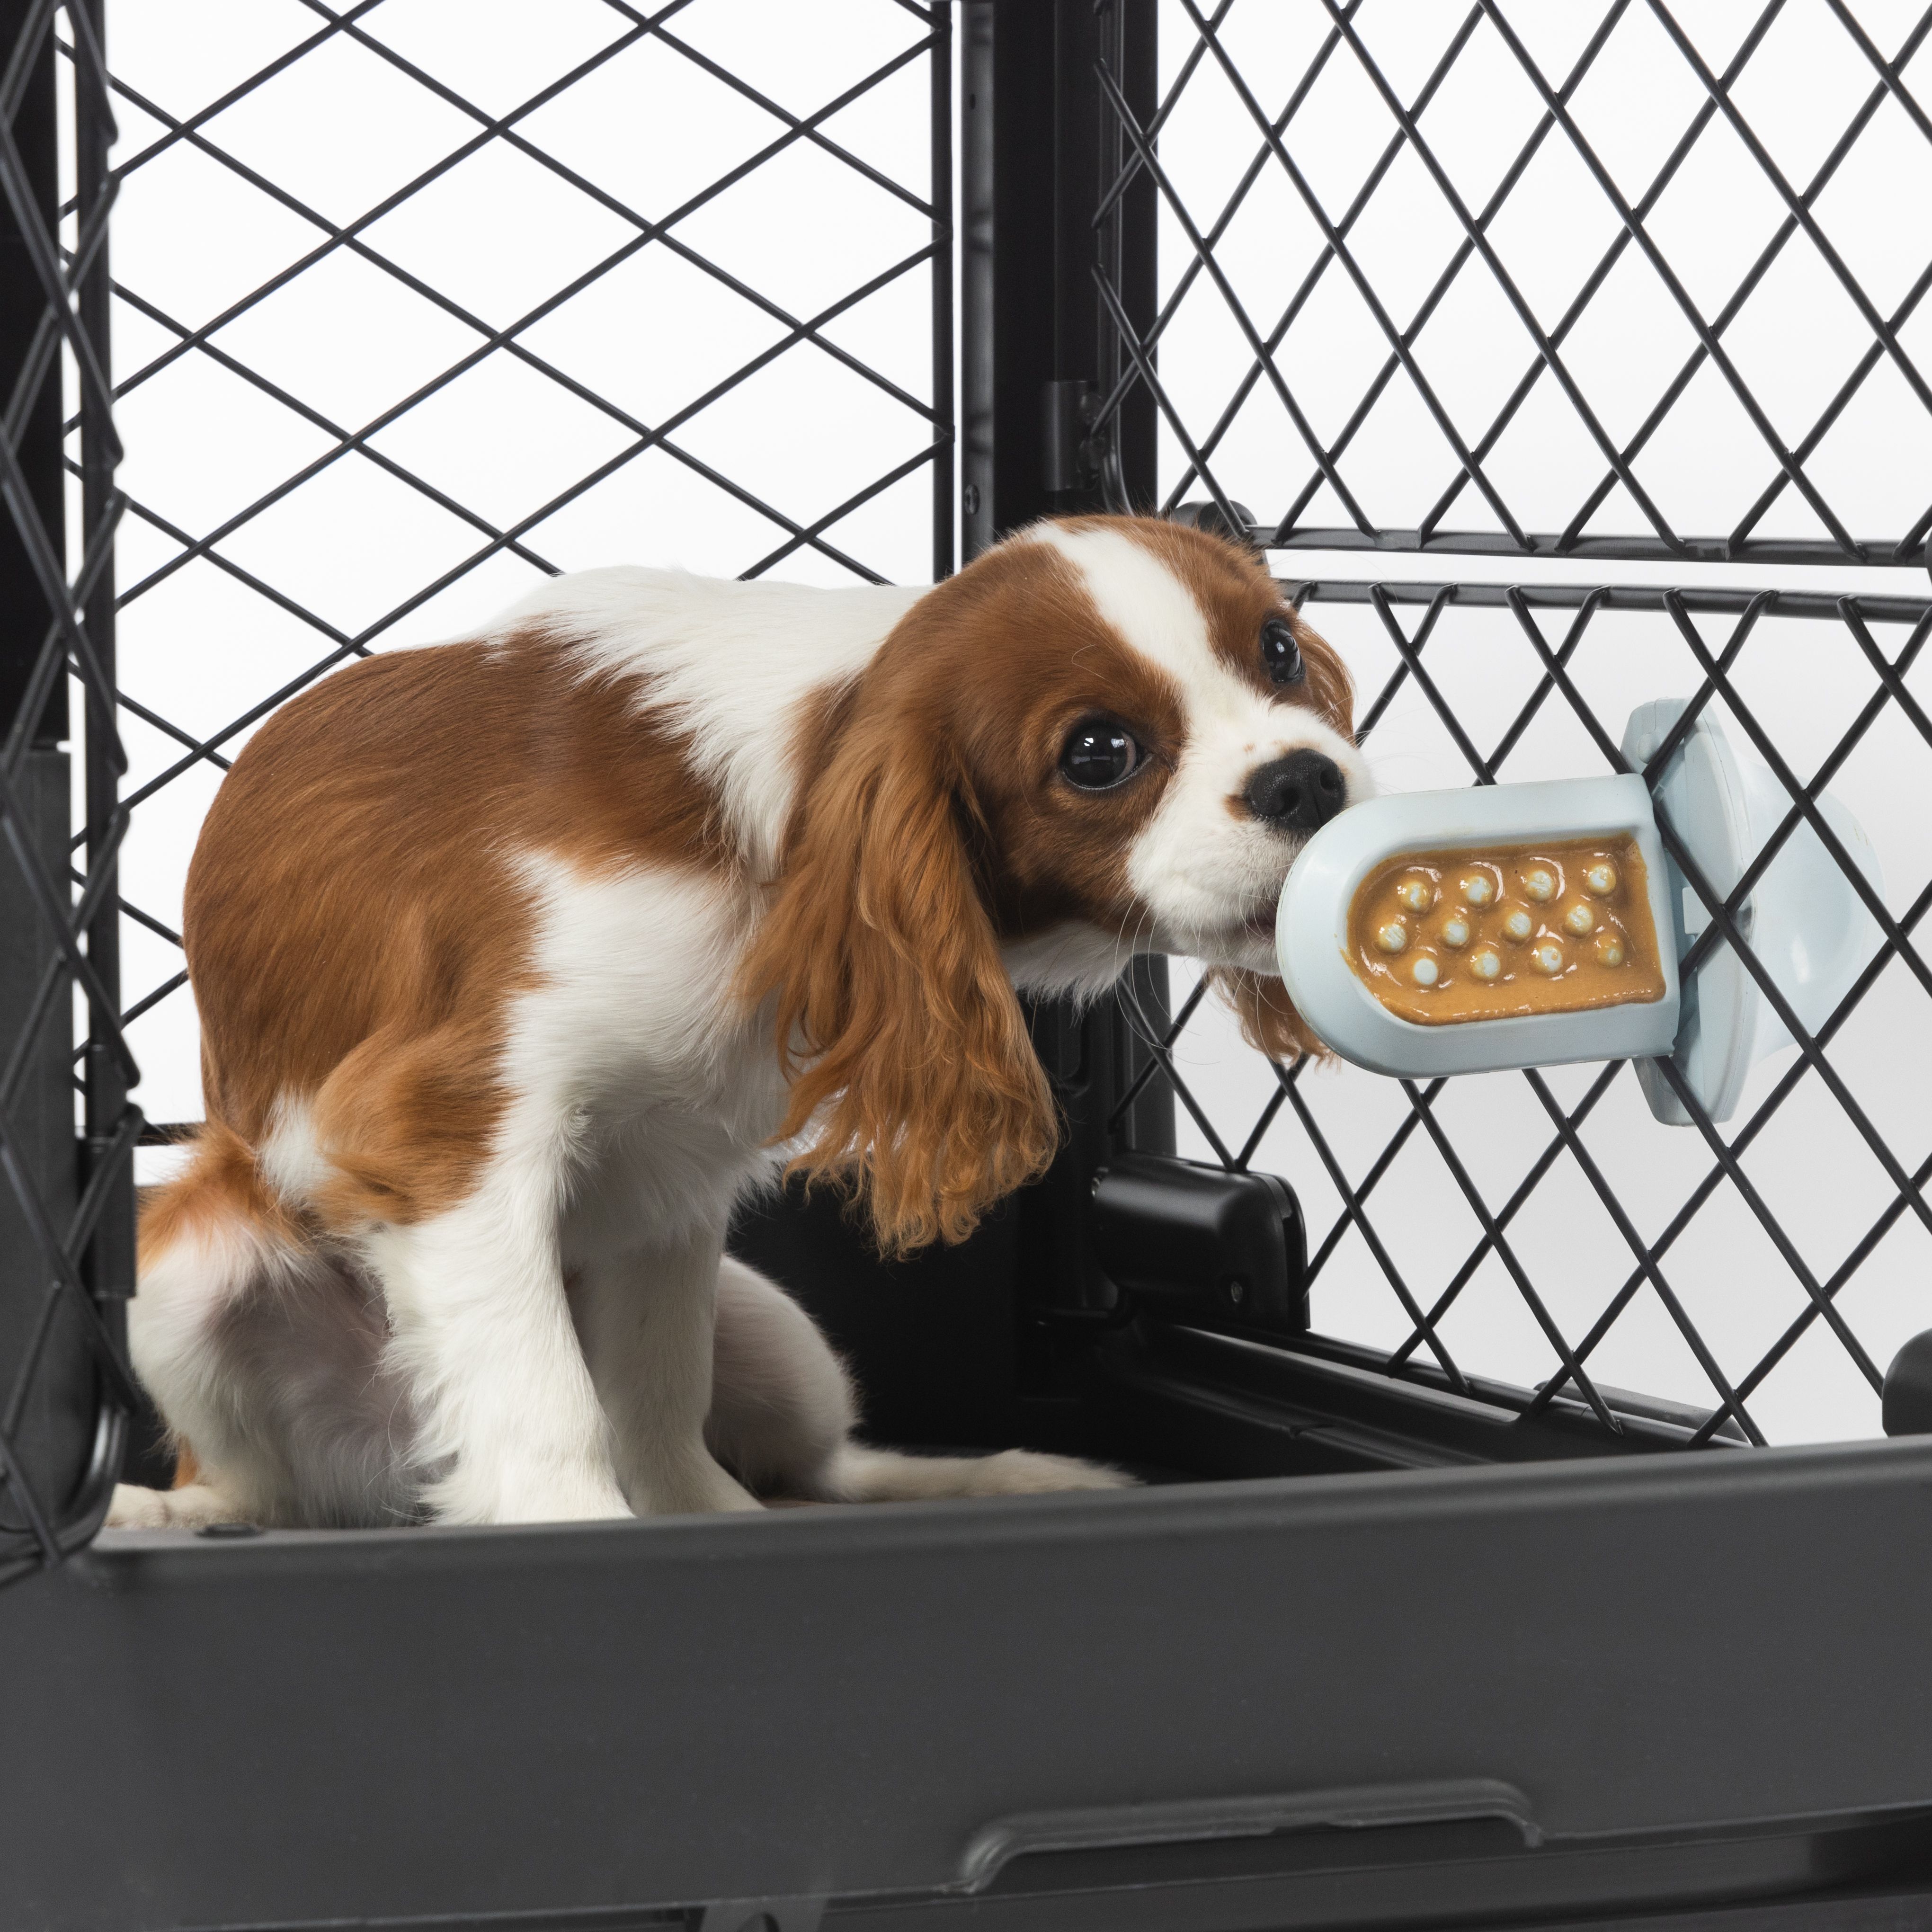 A puppy enjoying the treat spread on the Groov attached to the Mesh inside the Revol Crate.